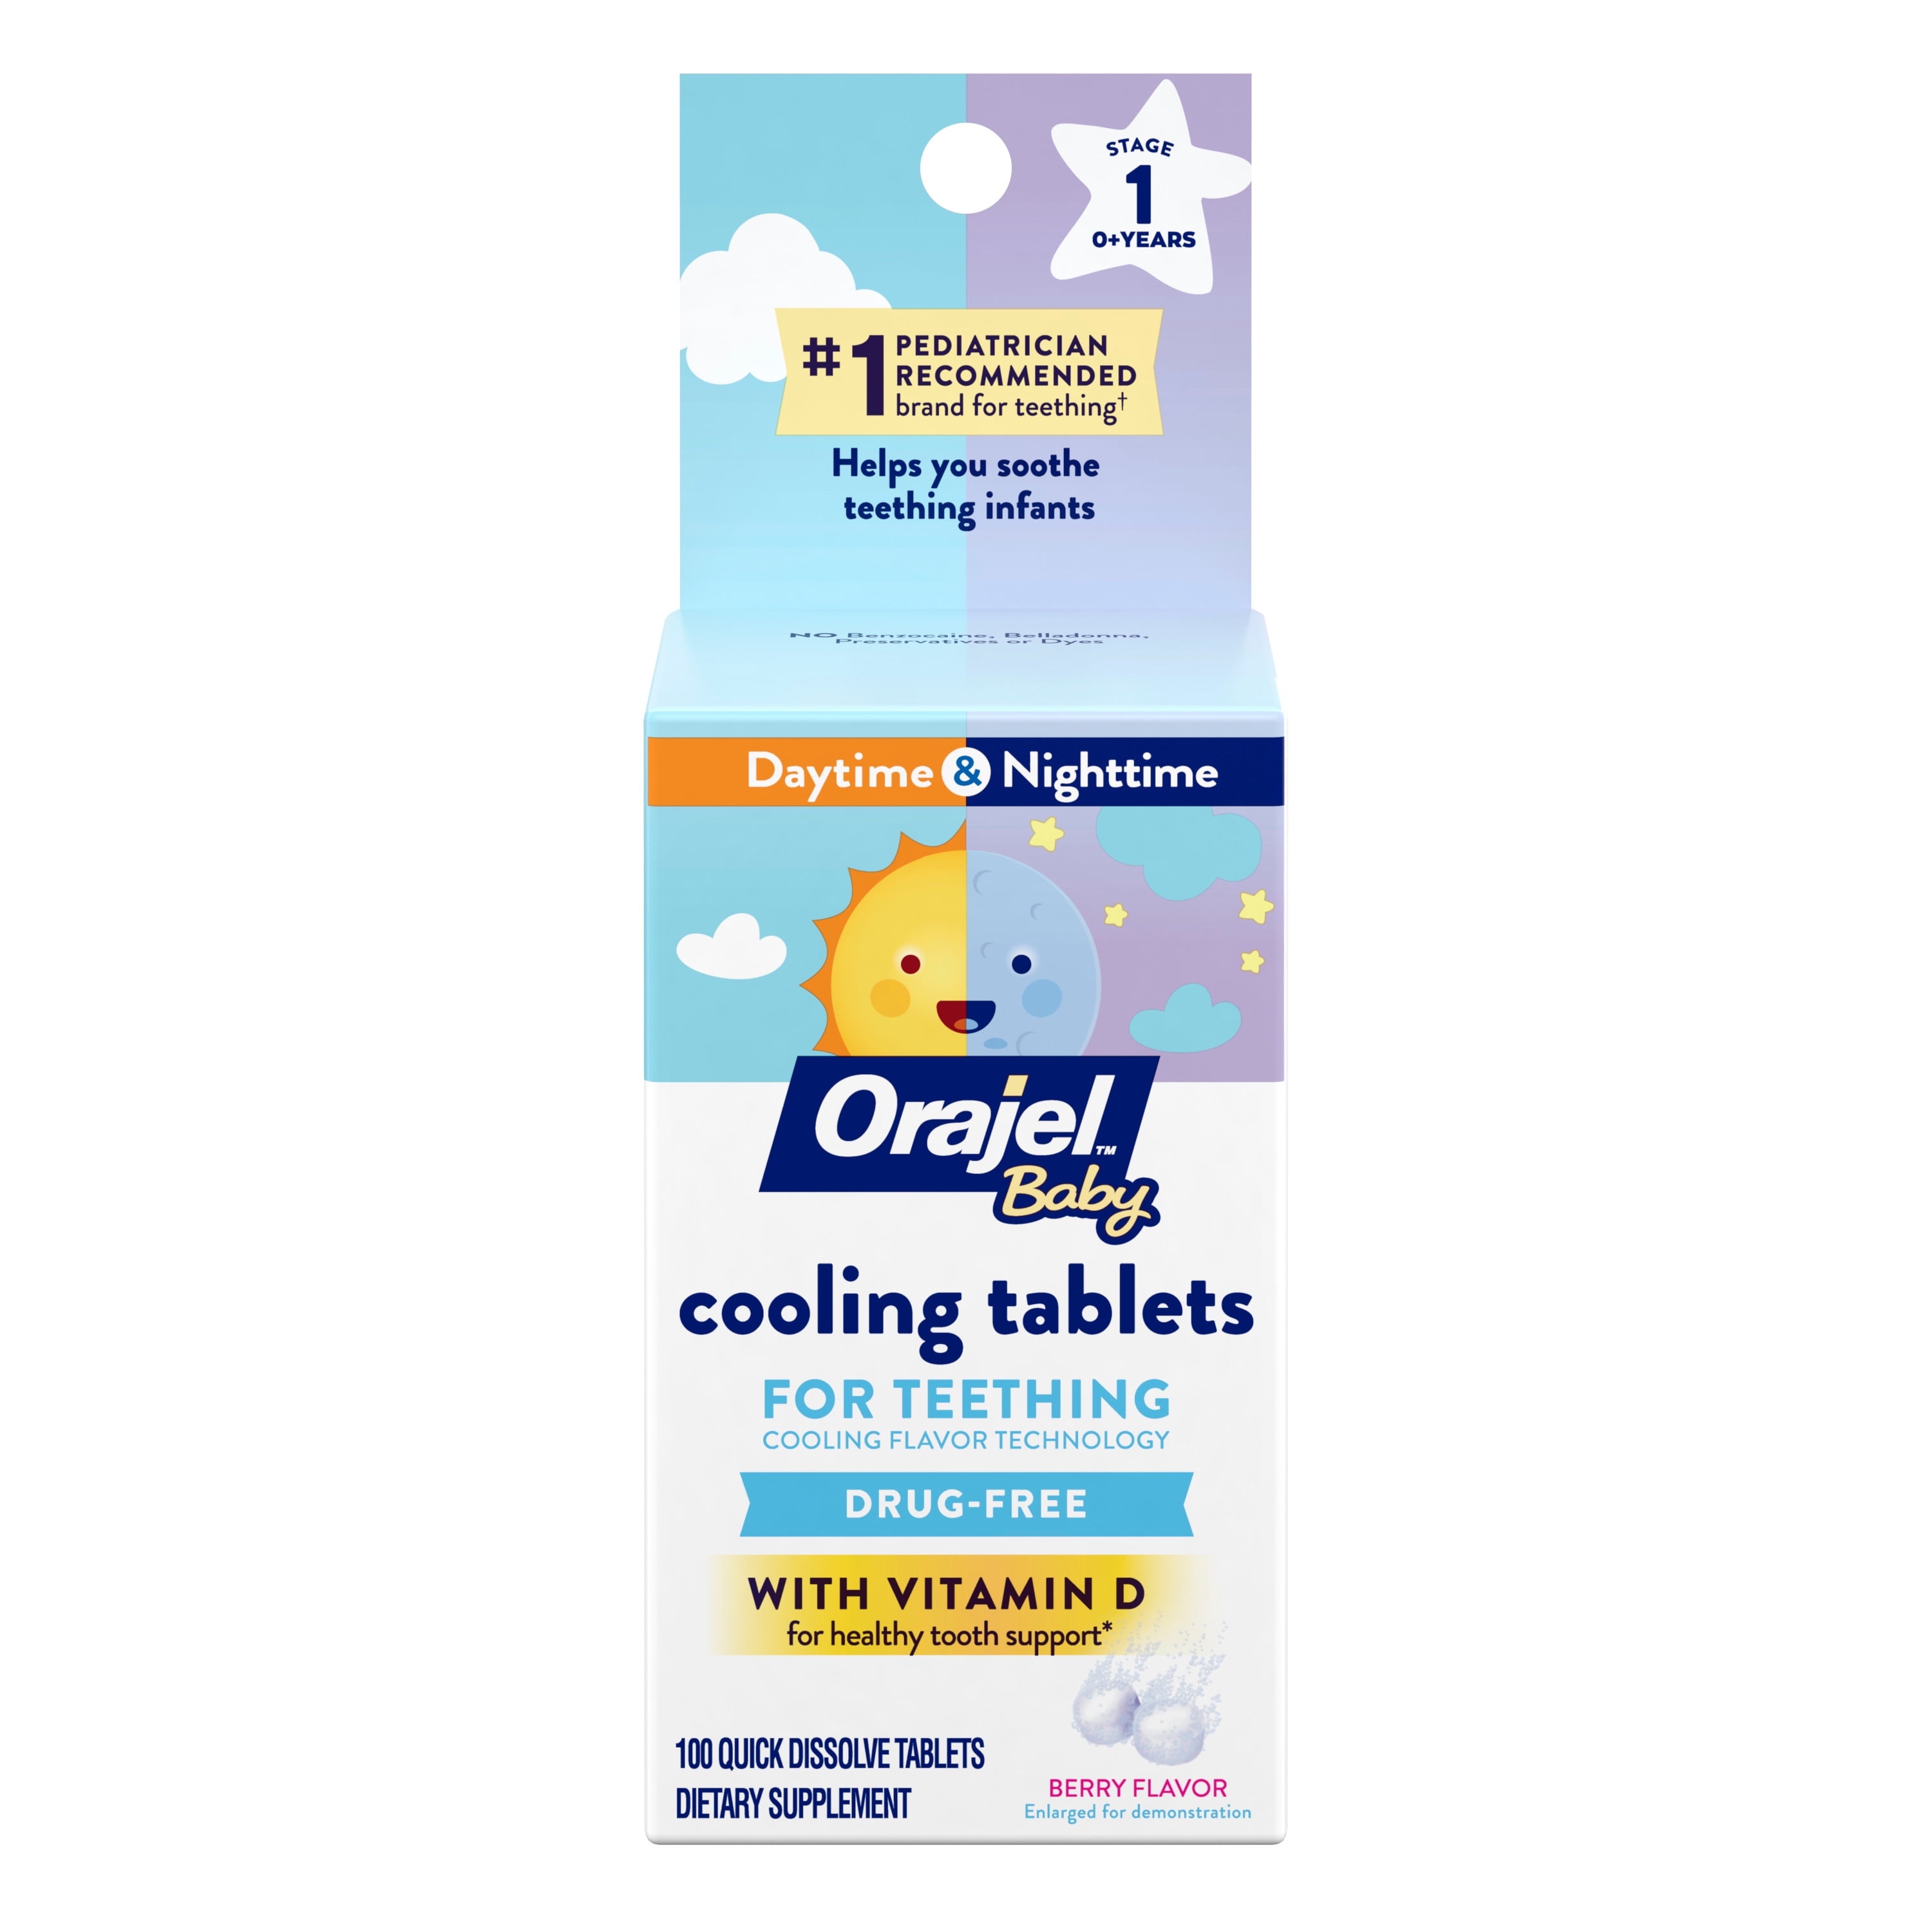 Orajel Baby Cooling Tablets for Teething with Vitamin D, 100 Quick Dissolve Tablets